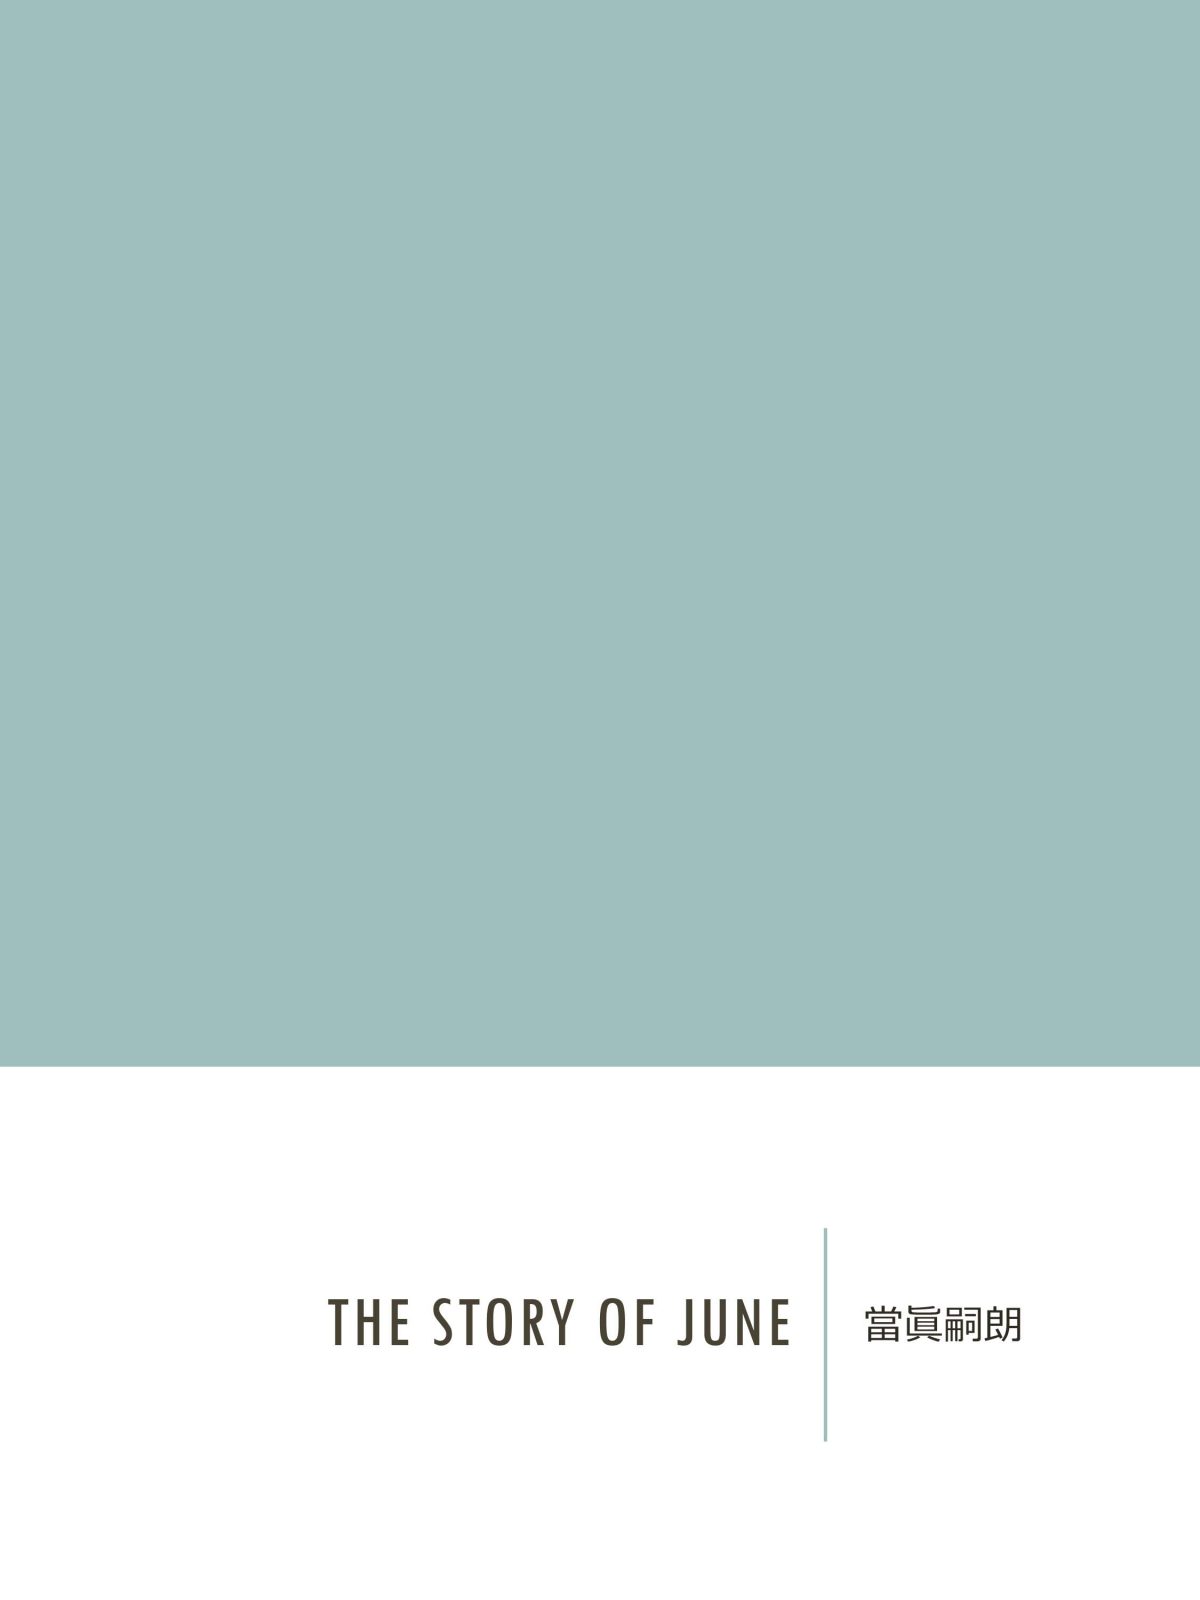 The story of June